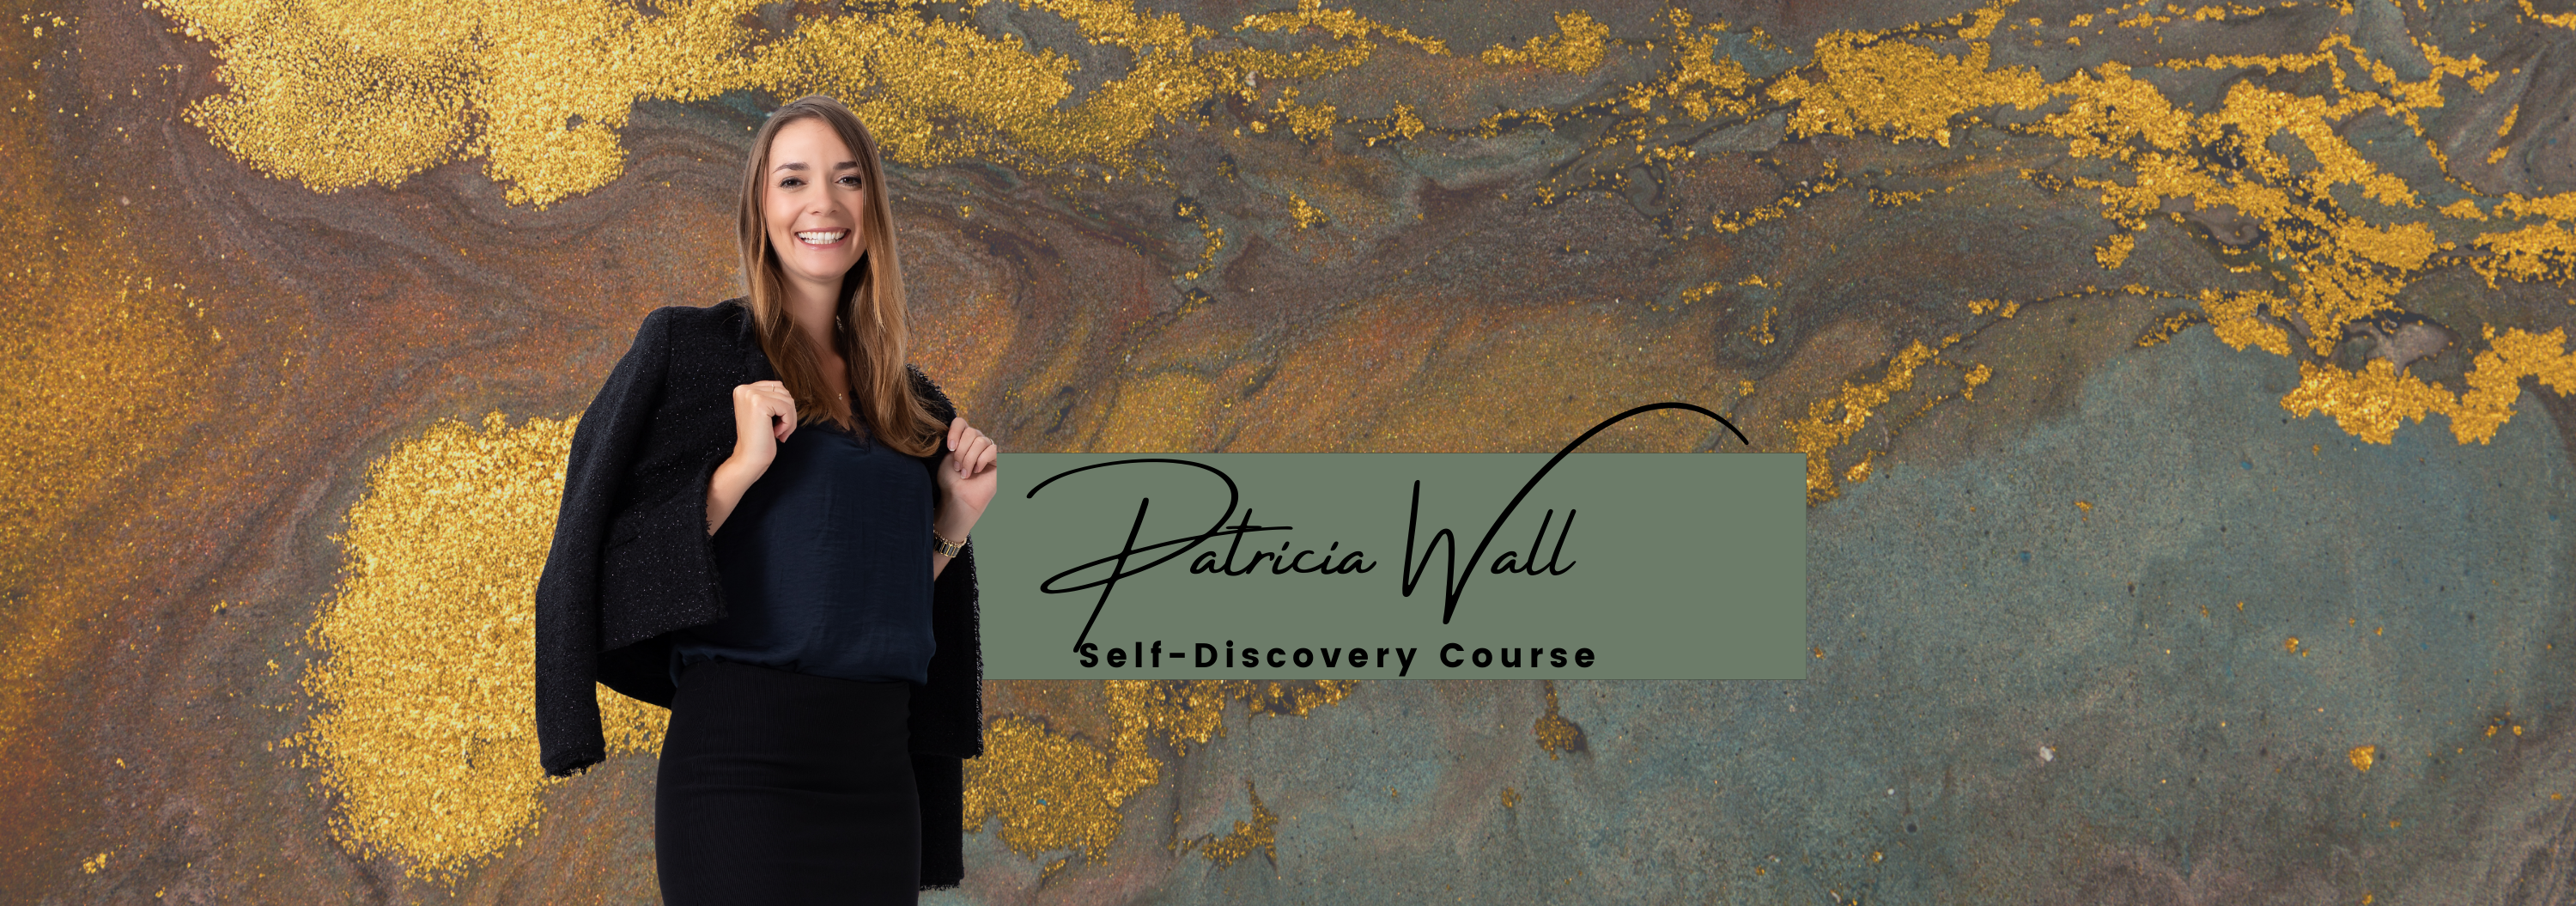 self-discovery course by patricia wall